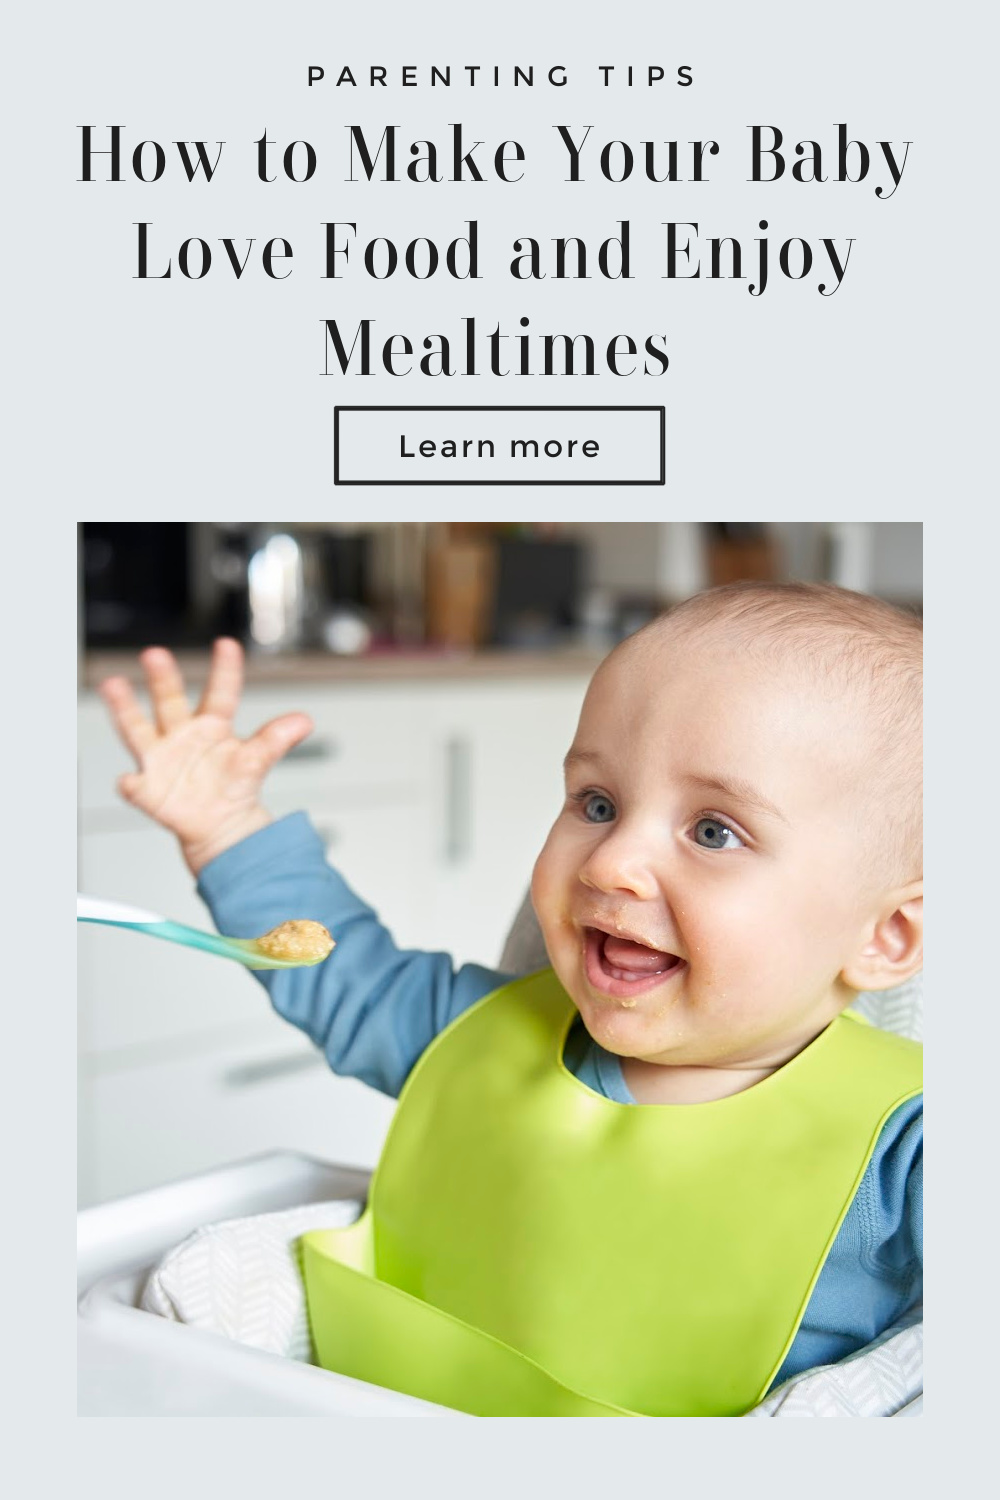 Make Baby Enjoy Mealtimes and Eating